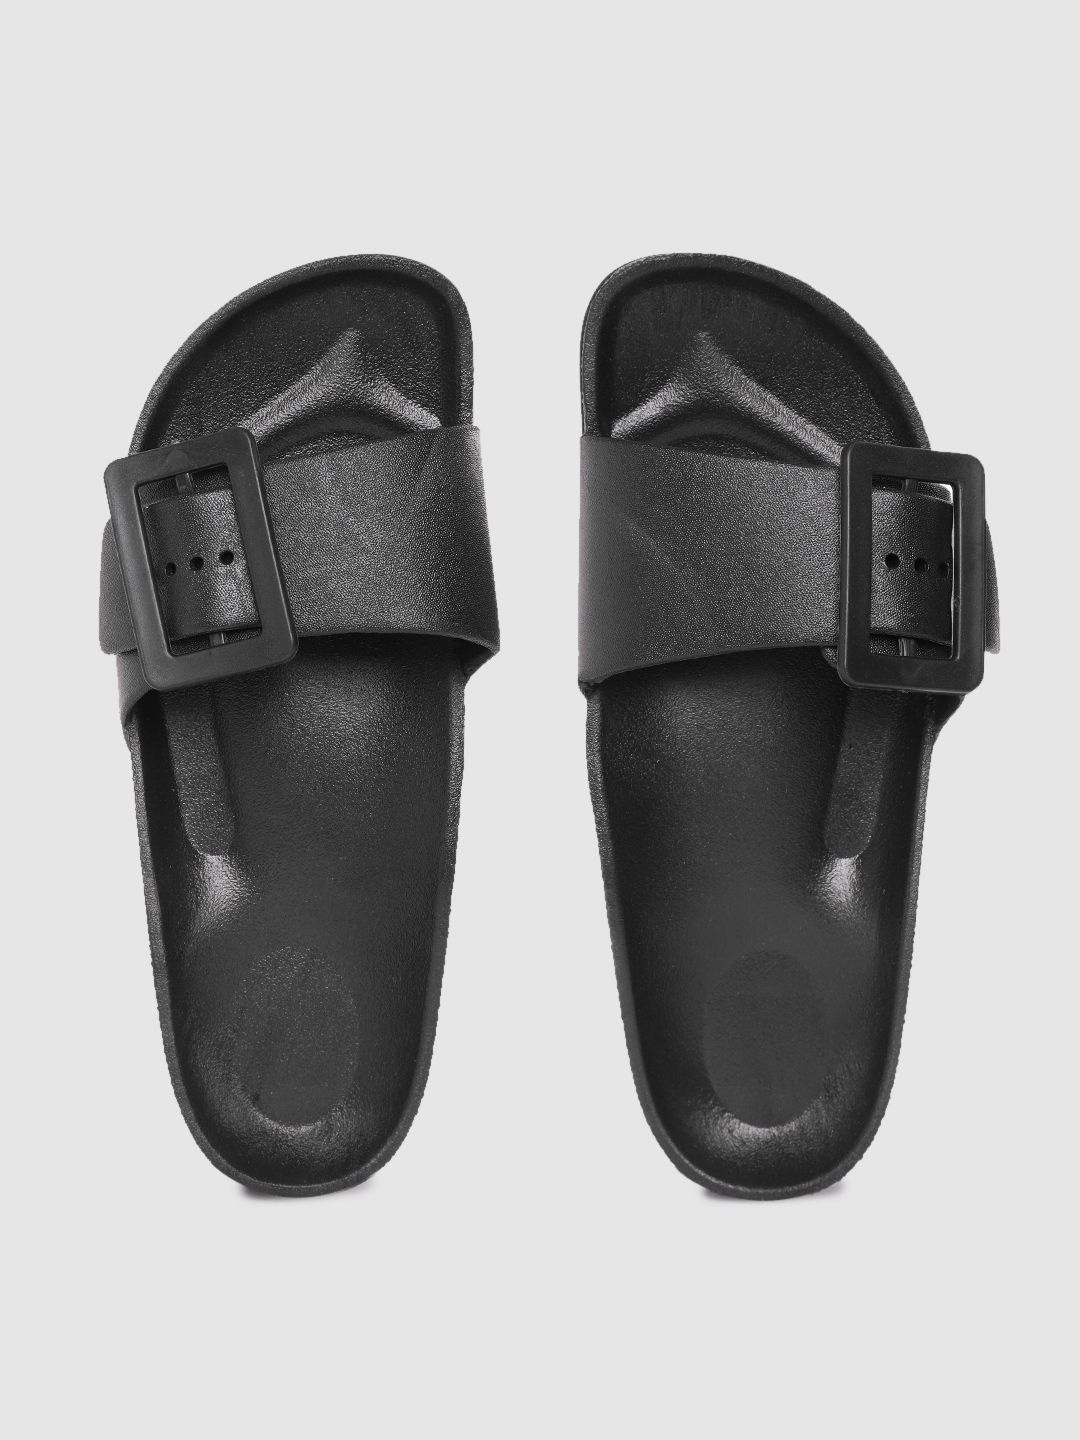 Carlton London sports Women Black Solid Sliders with Buckle Detail Price in India